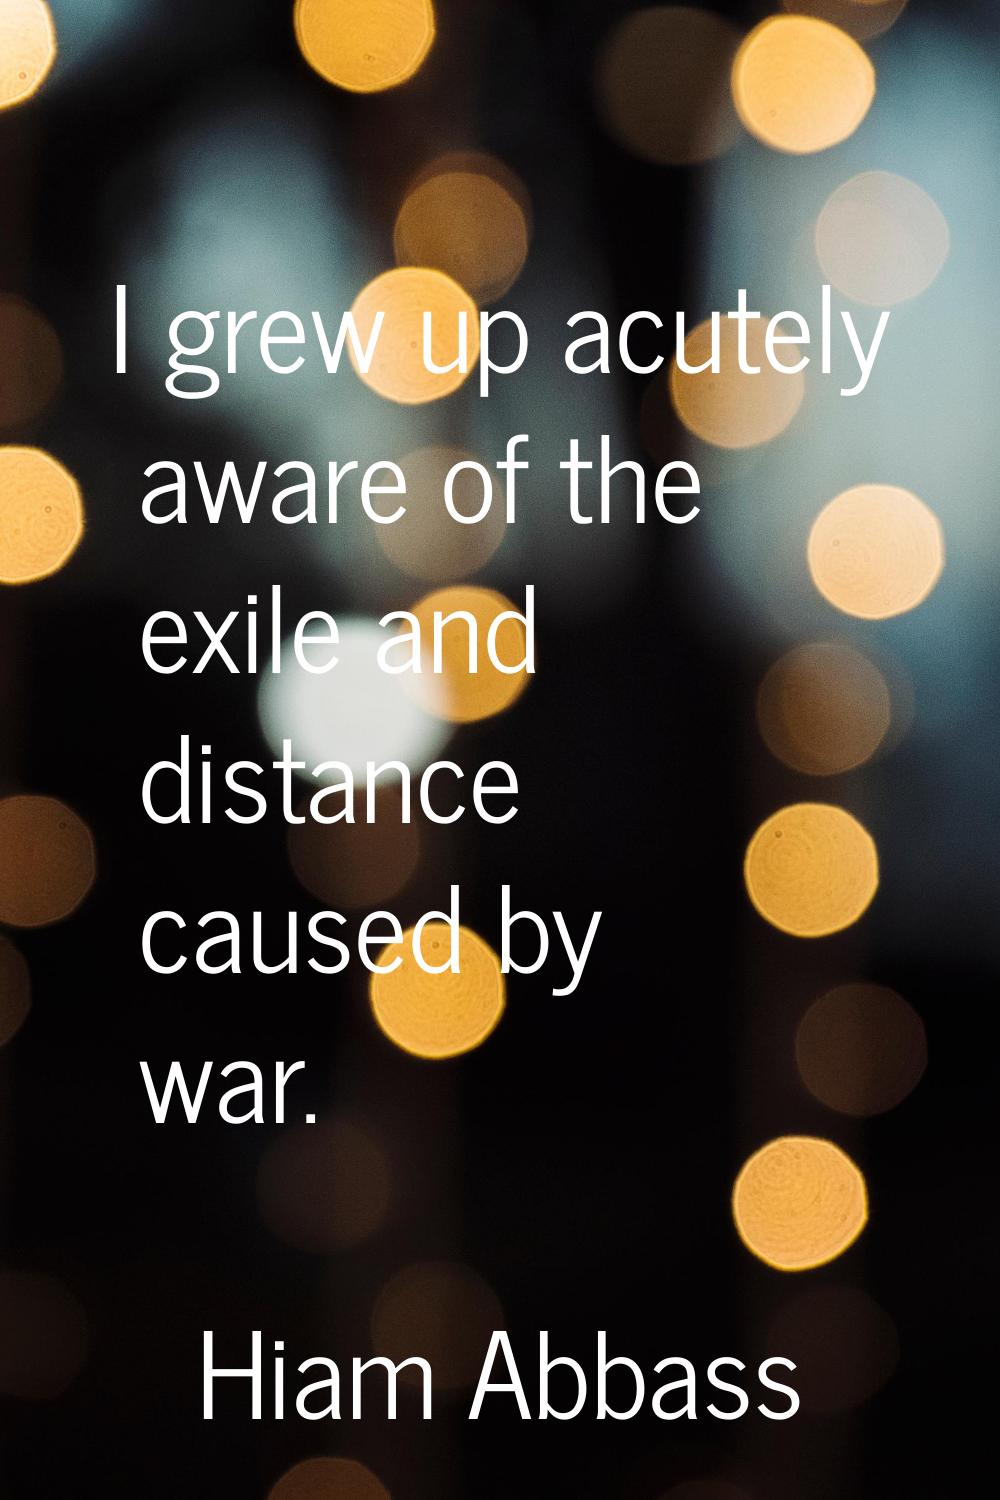 I grew up acutely aware of the exile and distance caused by war.